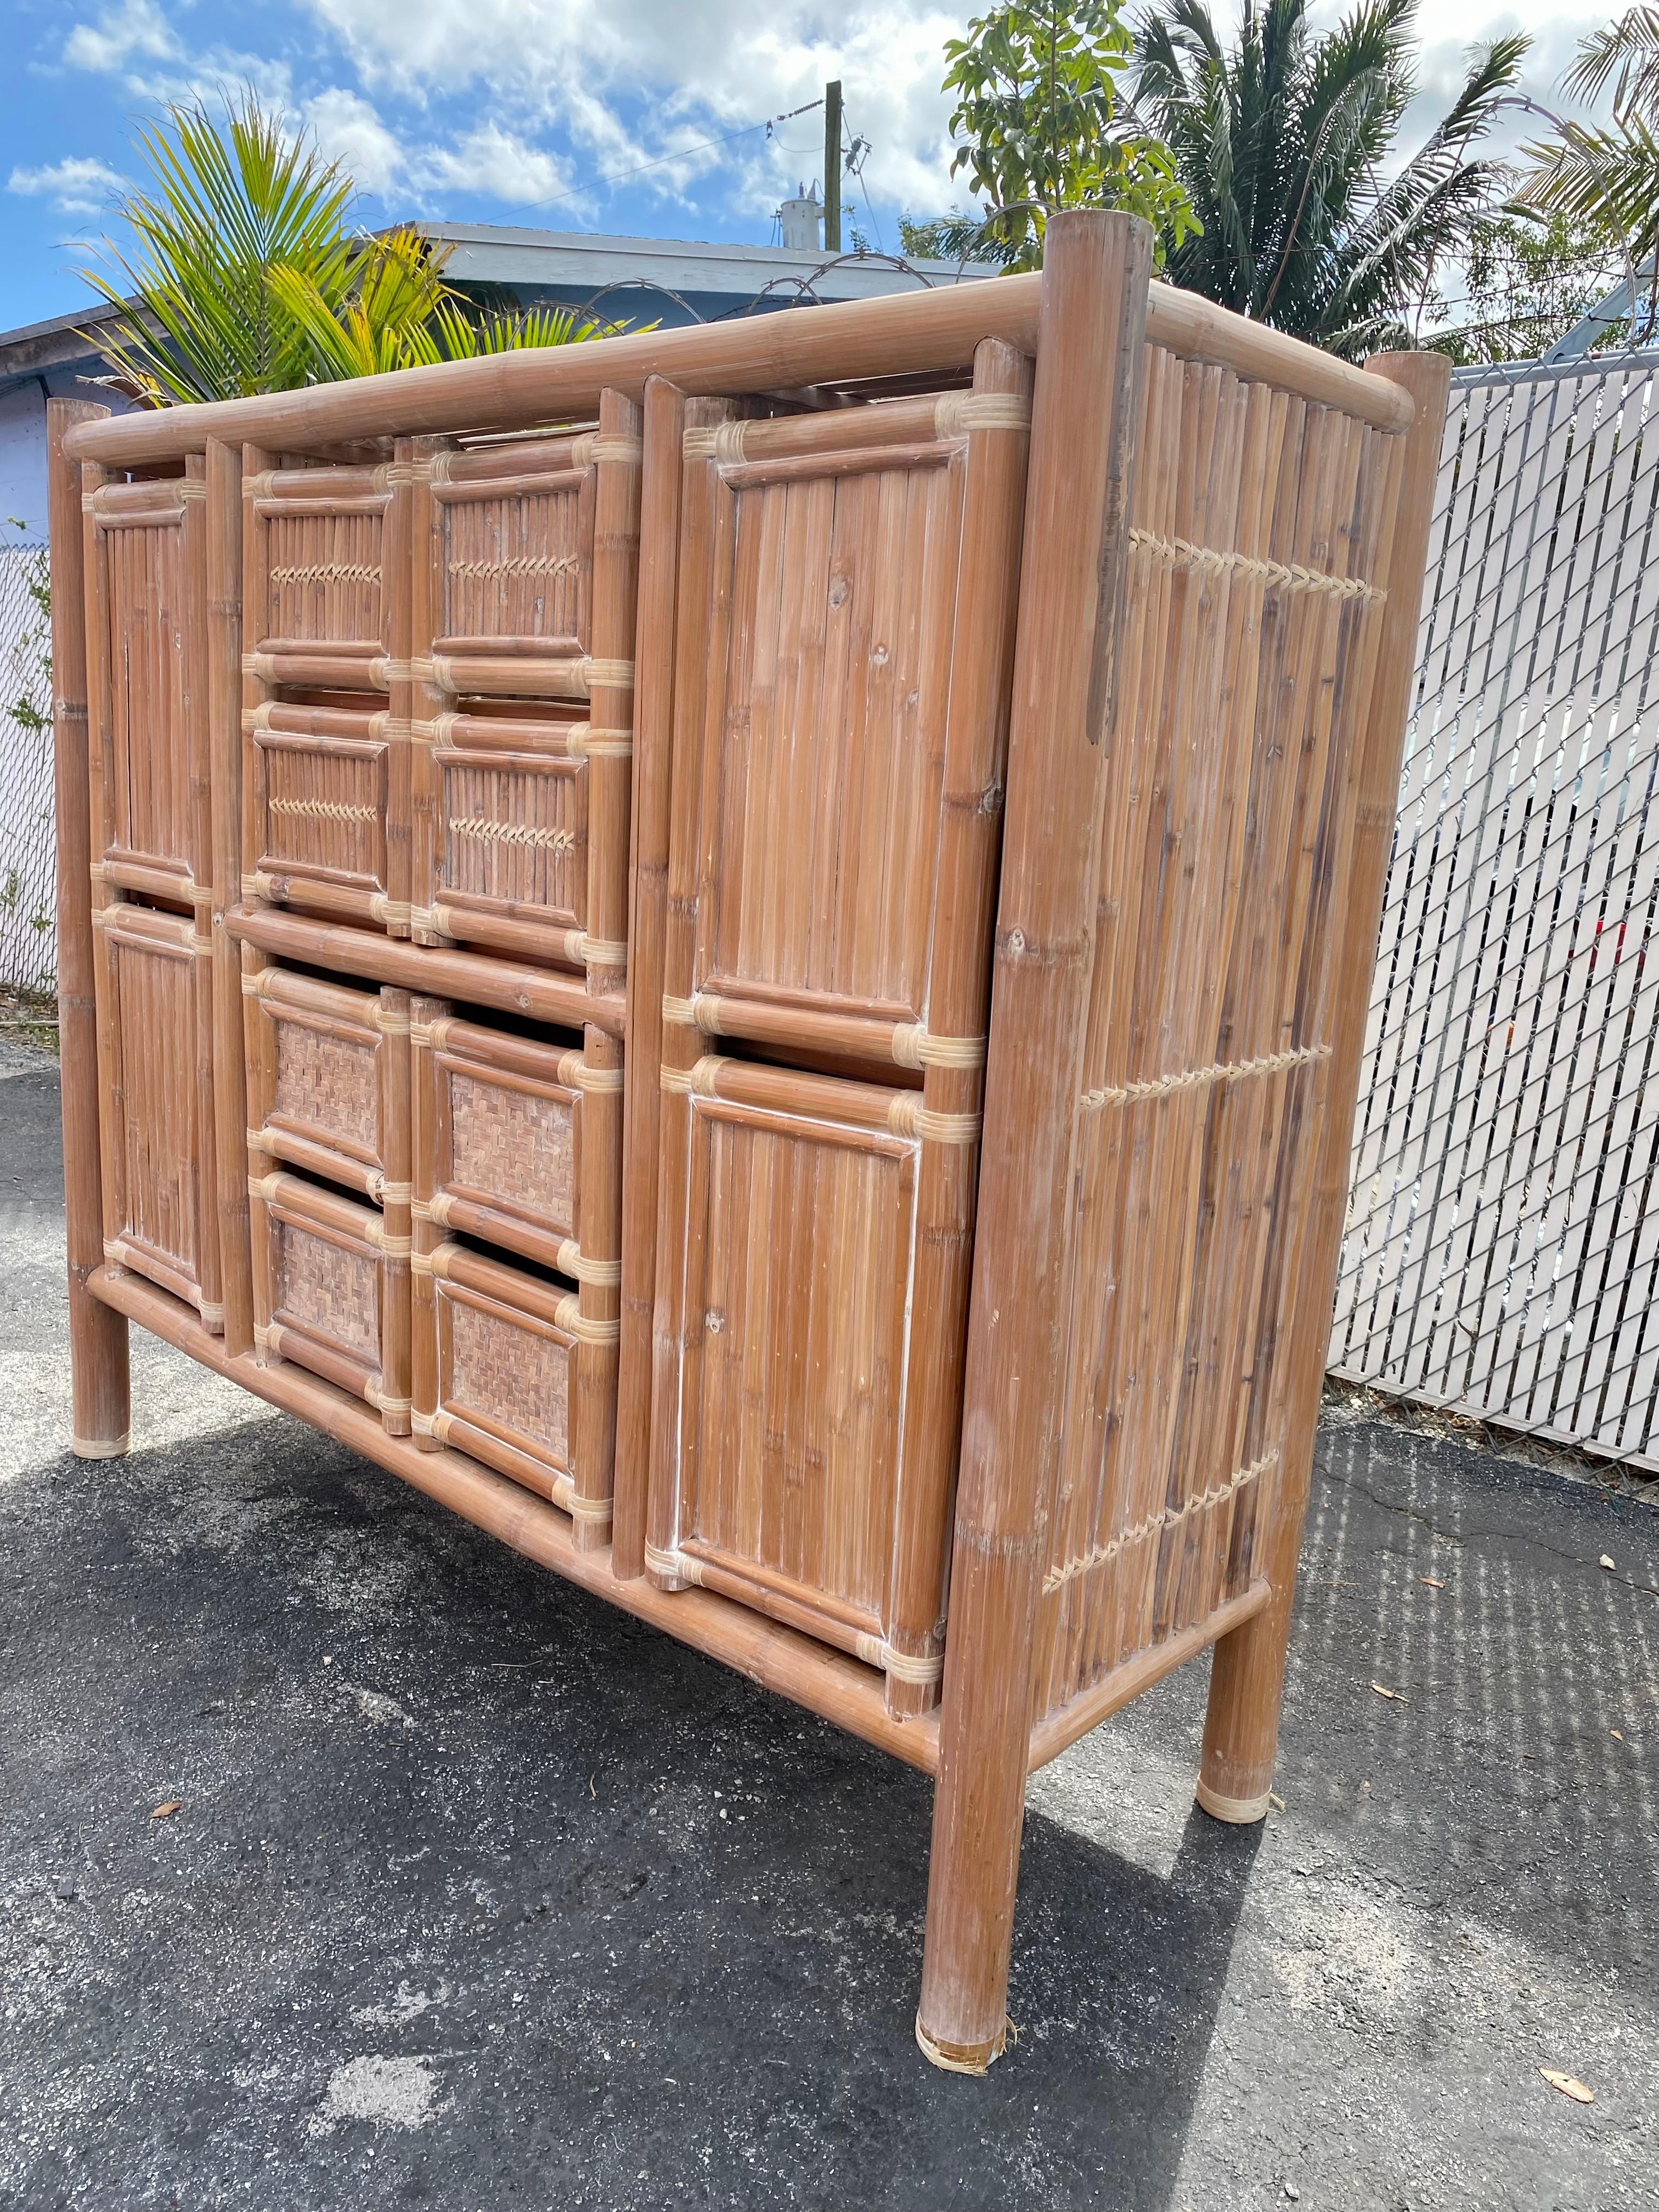 1970s Large Organic Bamboo Rattan Slatted Storage Cabinet Wardrobe In Good Condition For Sale In Fort Lauderdale, FL